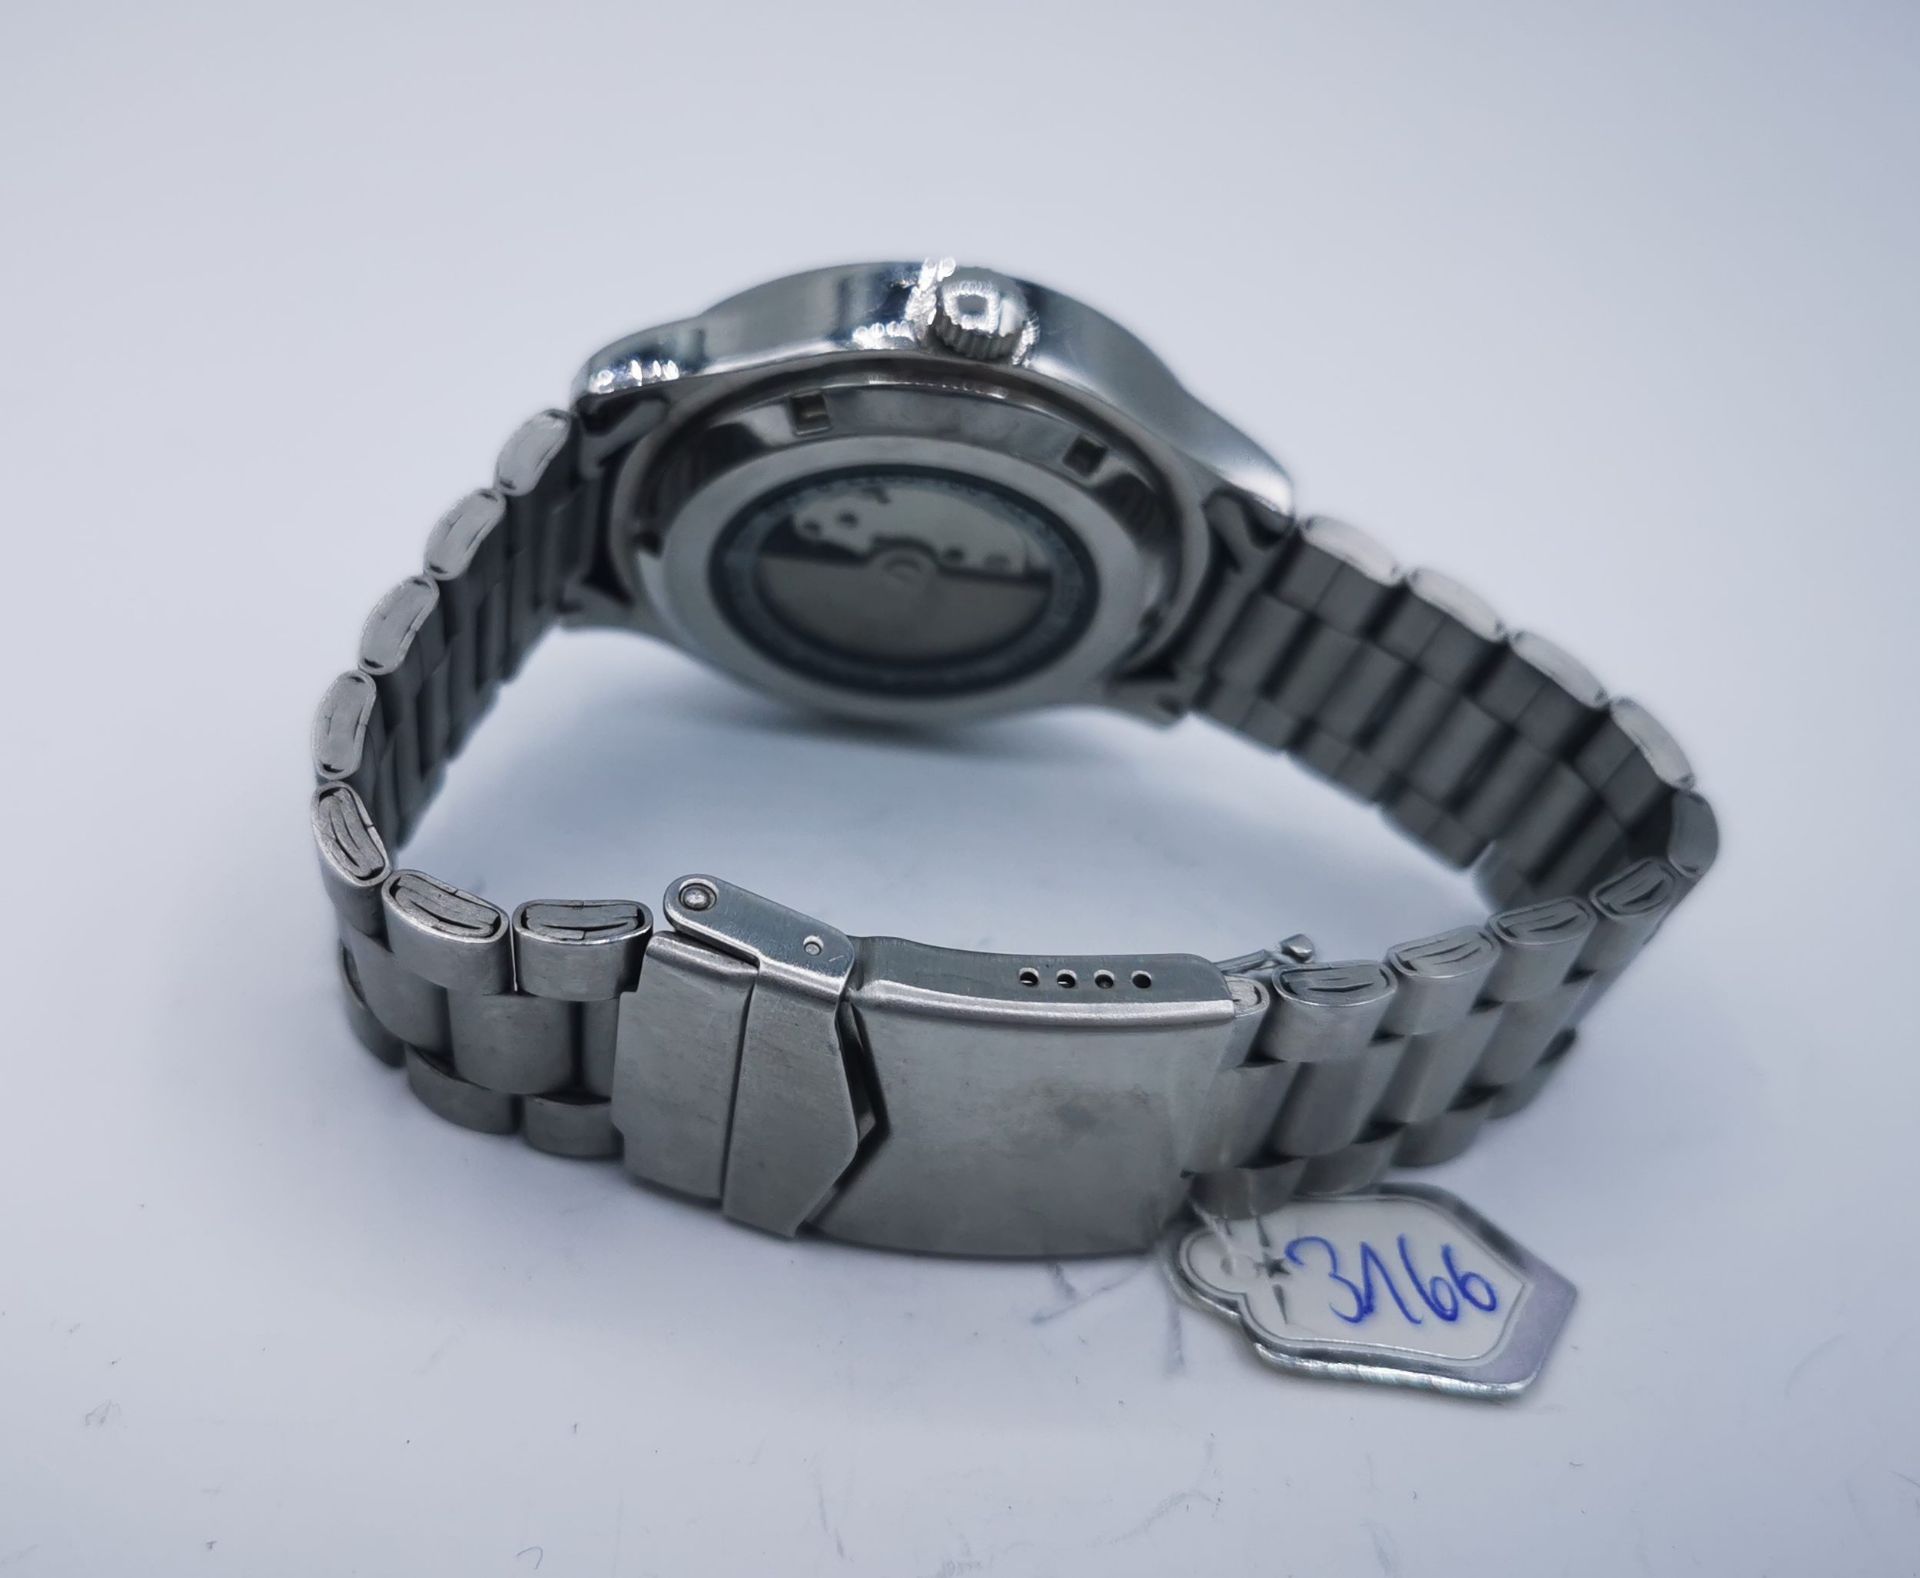 MEISTER ANKER WRISTWATCH - Image 3 of 4